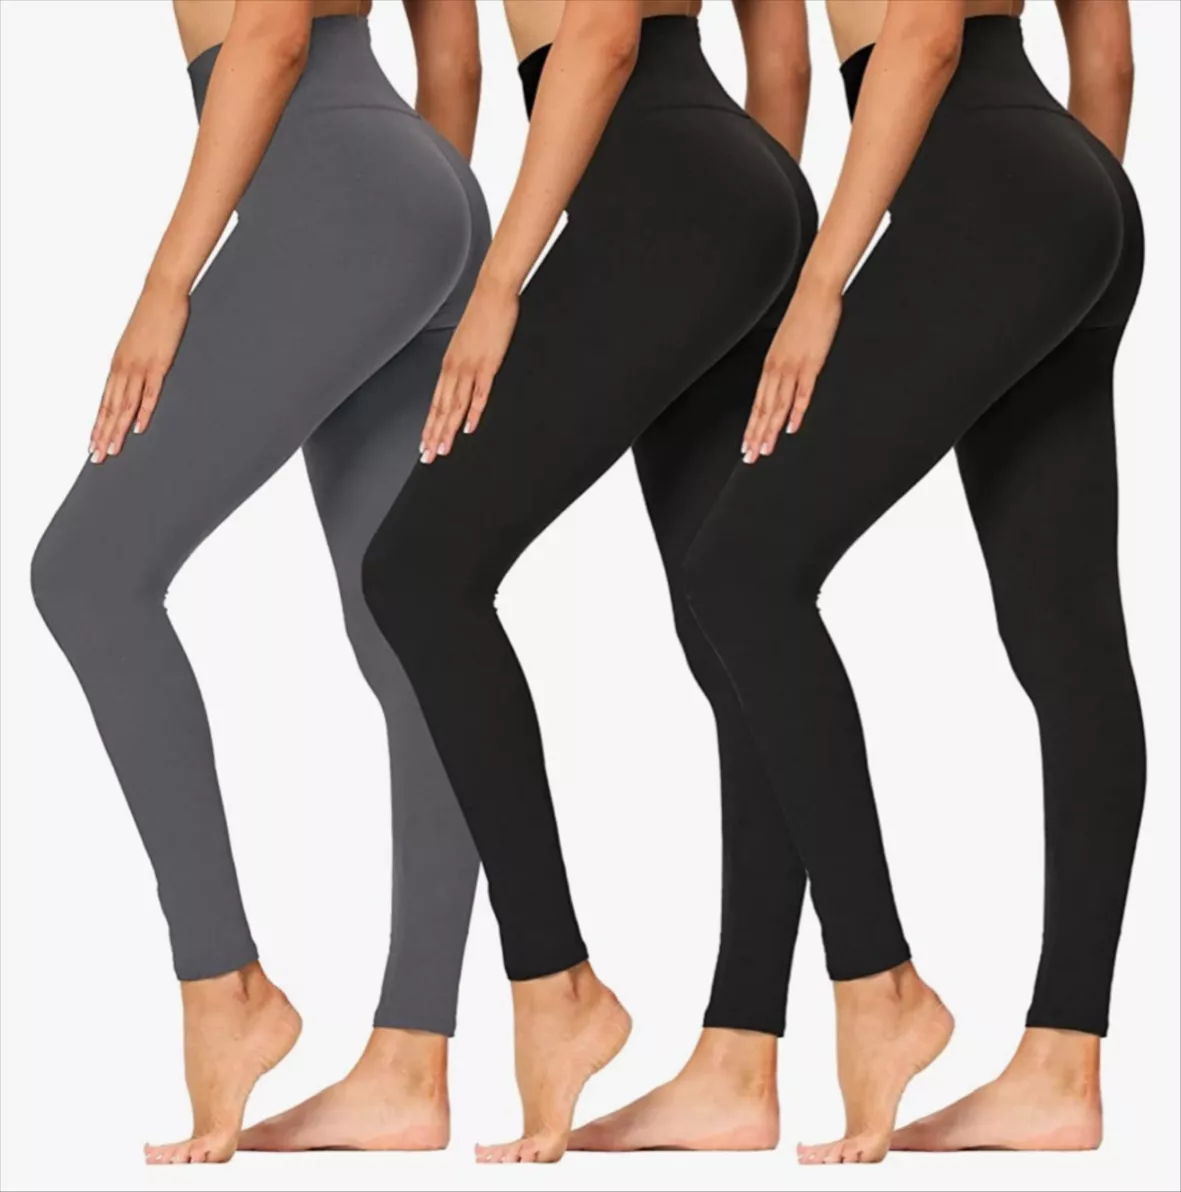 Women's Wool Leggings, High Waisted, Soft And Glutinous